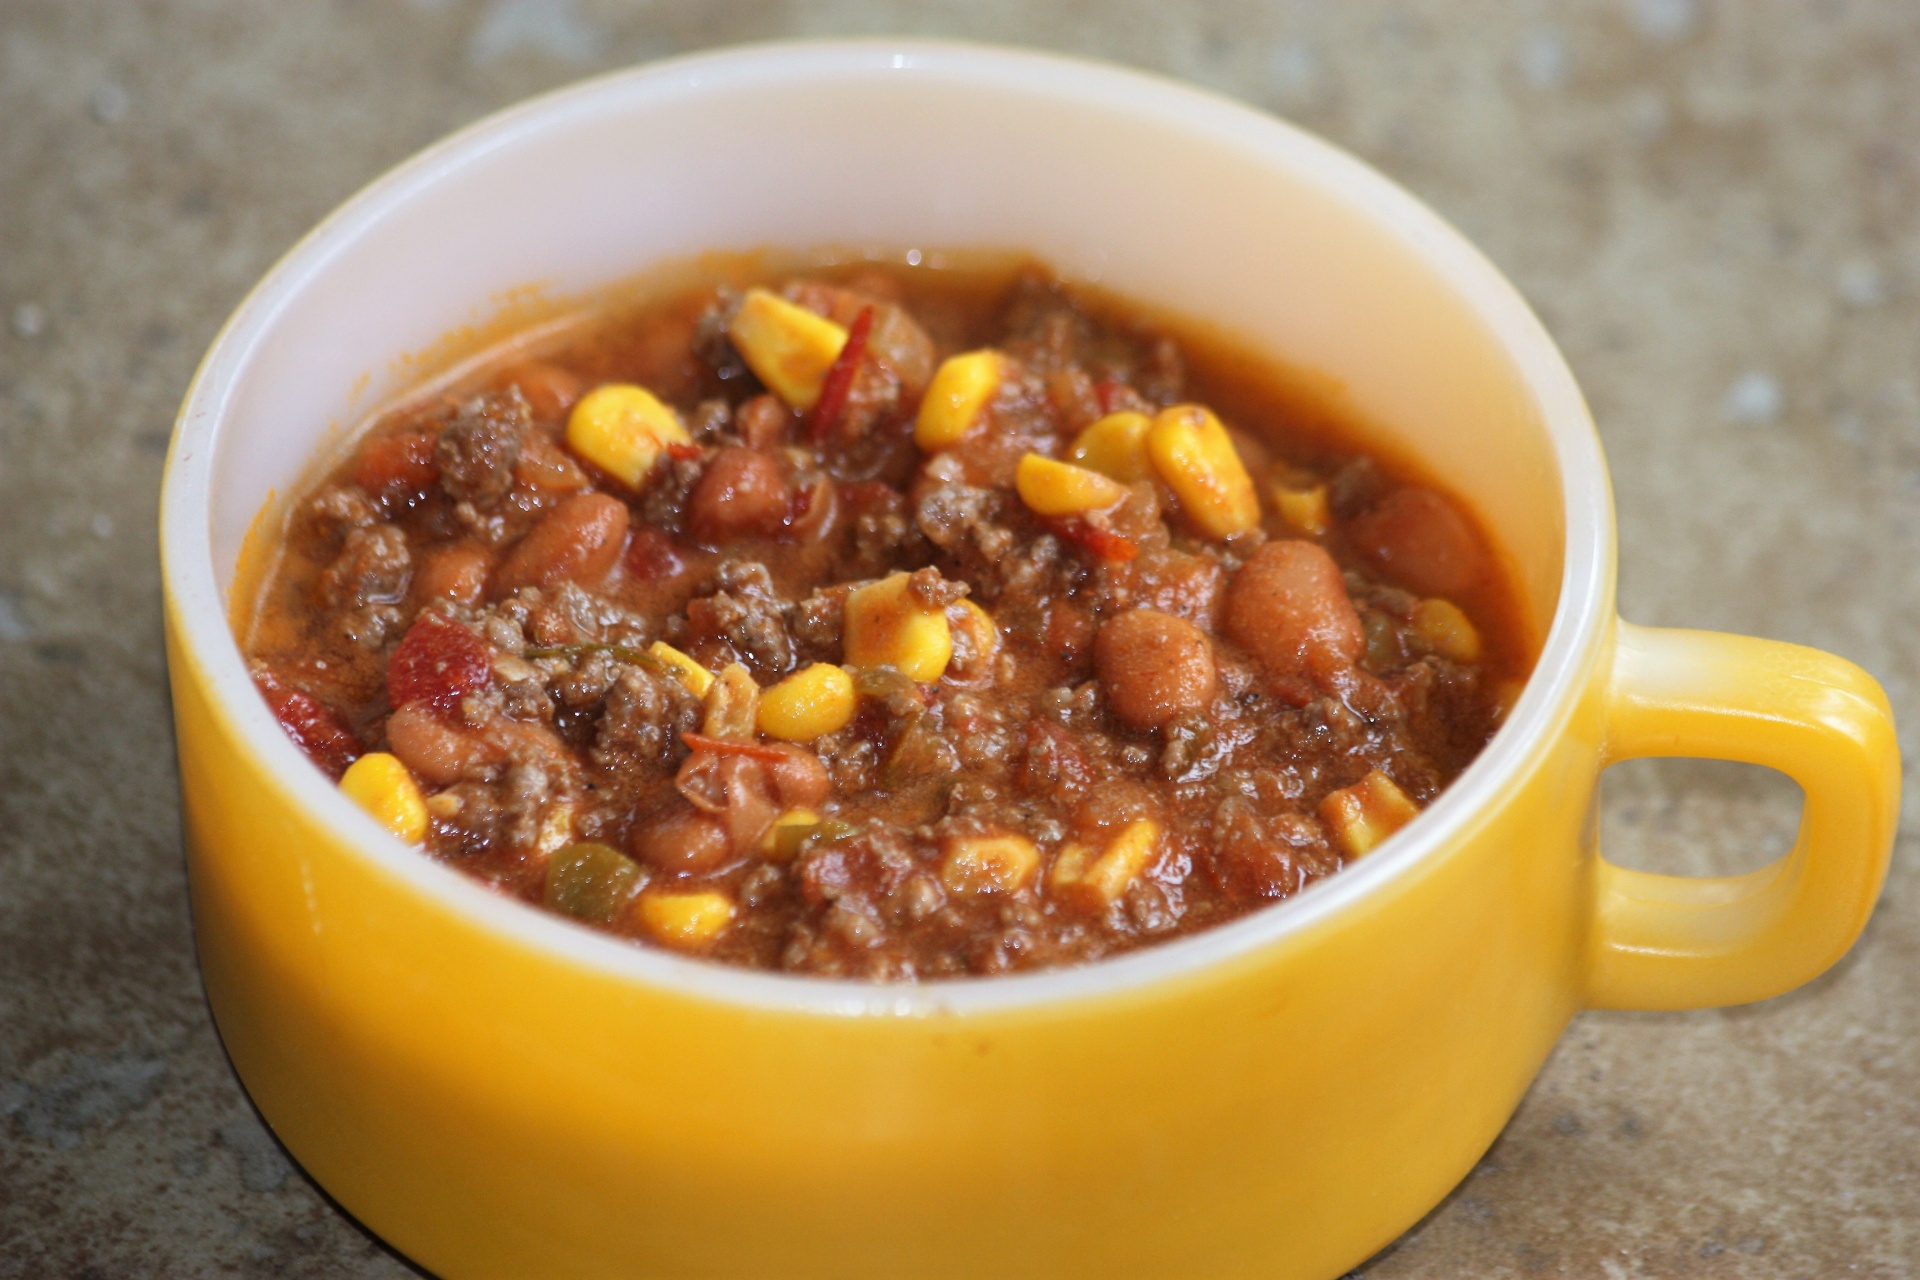 Awesome Beef or Chicken Taco Soup